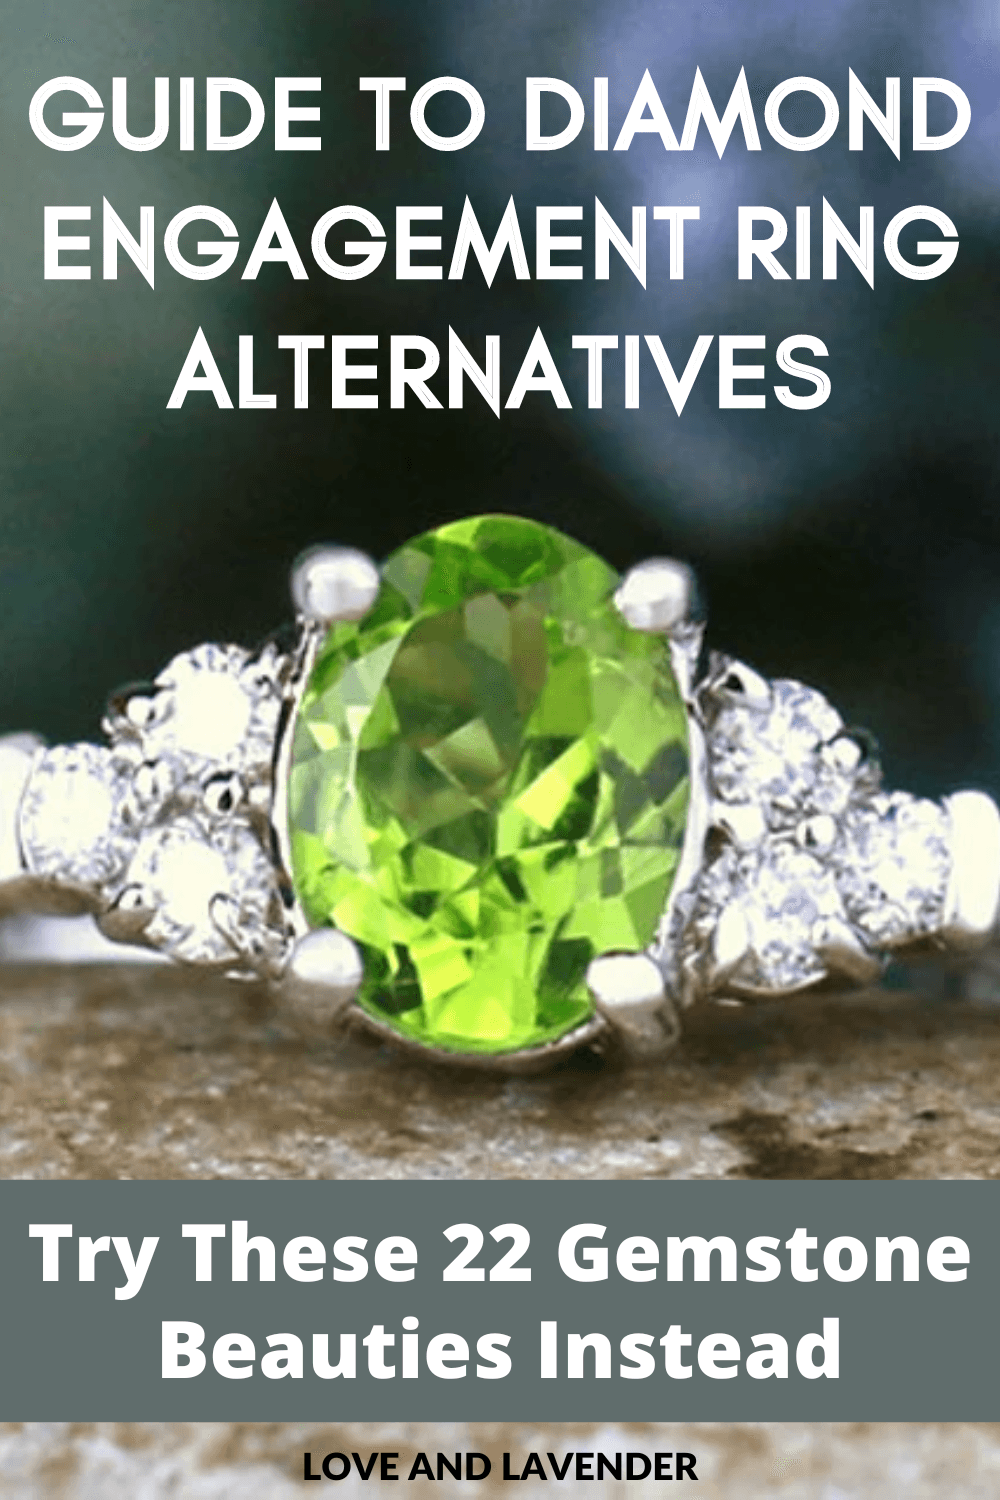 Guide to Diamond Engagement Ring Alternatives: Try These 22 Gemstone Beauties Instead